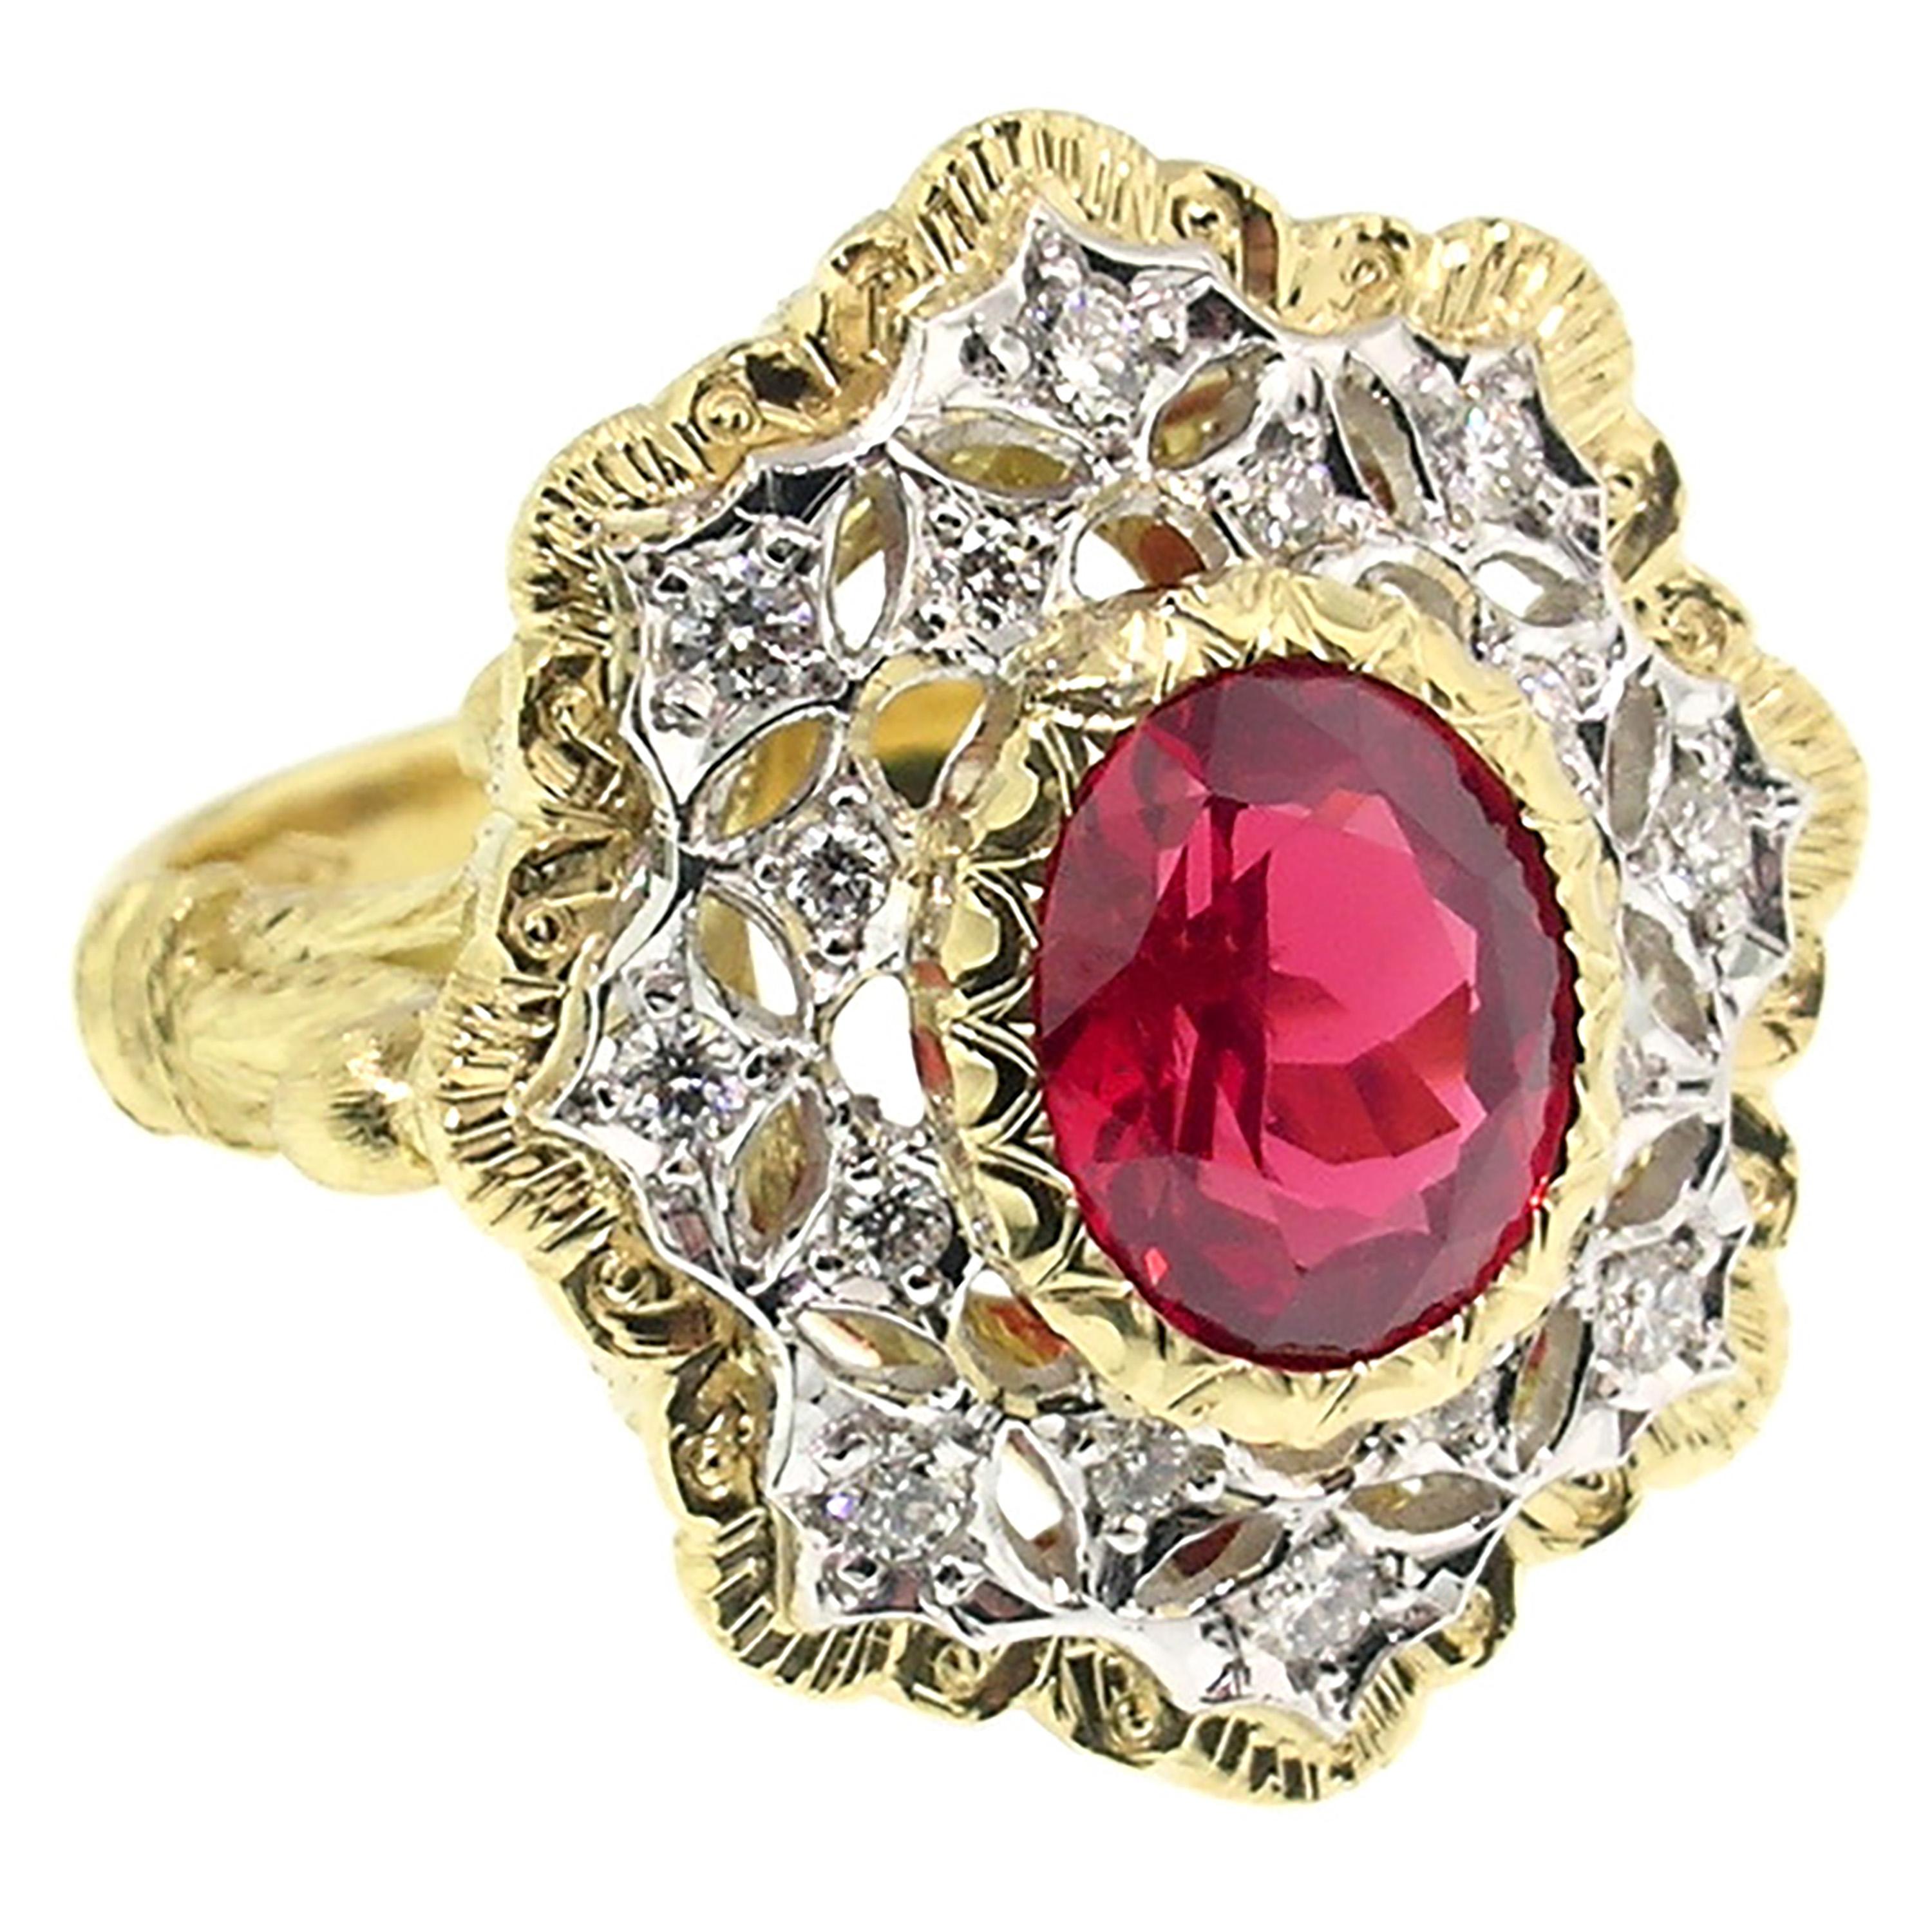 The Giulia ring is one of my favorite cocktail styles; the intricate, lacy style is built up gorgeously around the featured gemstone, making for an exceptional statement piece. This Giulia ring perfectly represents one of my favorite jewelry